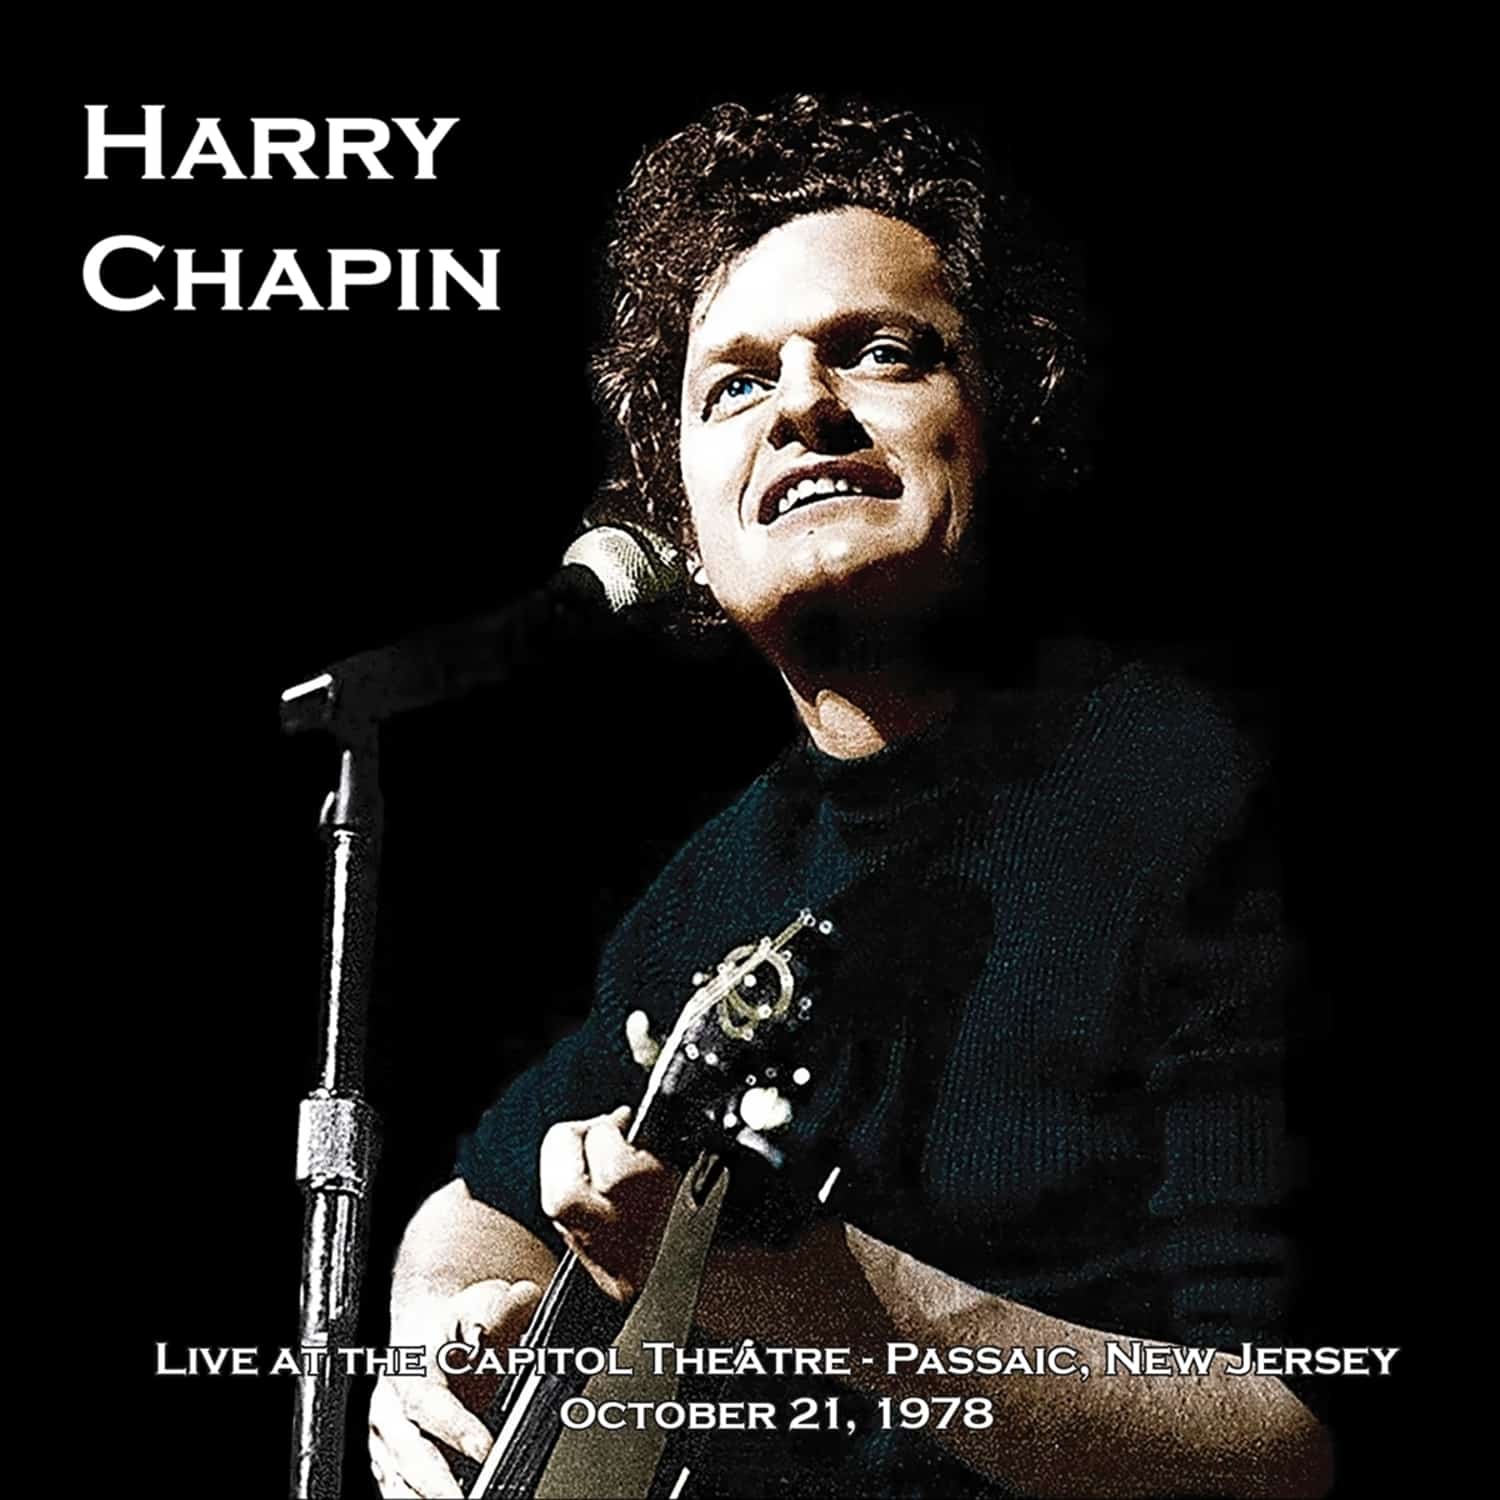 Harry Chapin - LIVE AT THE CAPITOL THEATER OCT 21, 1978 